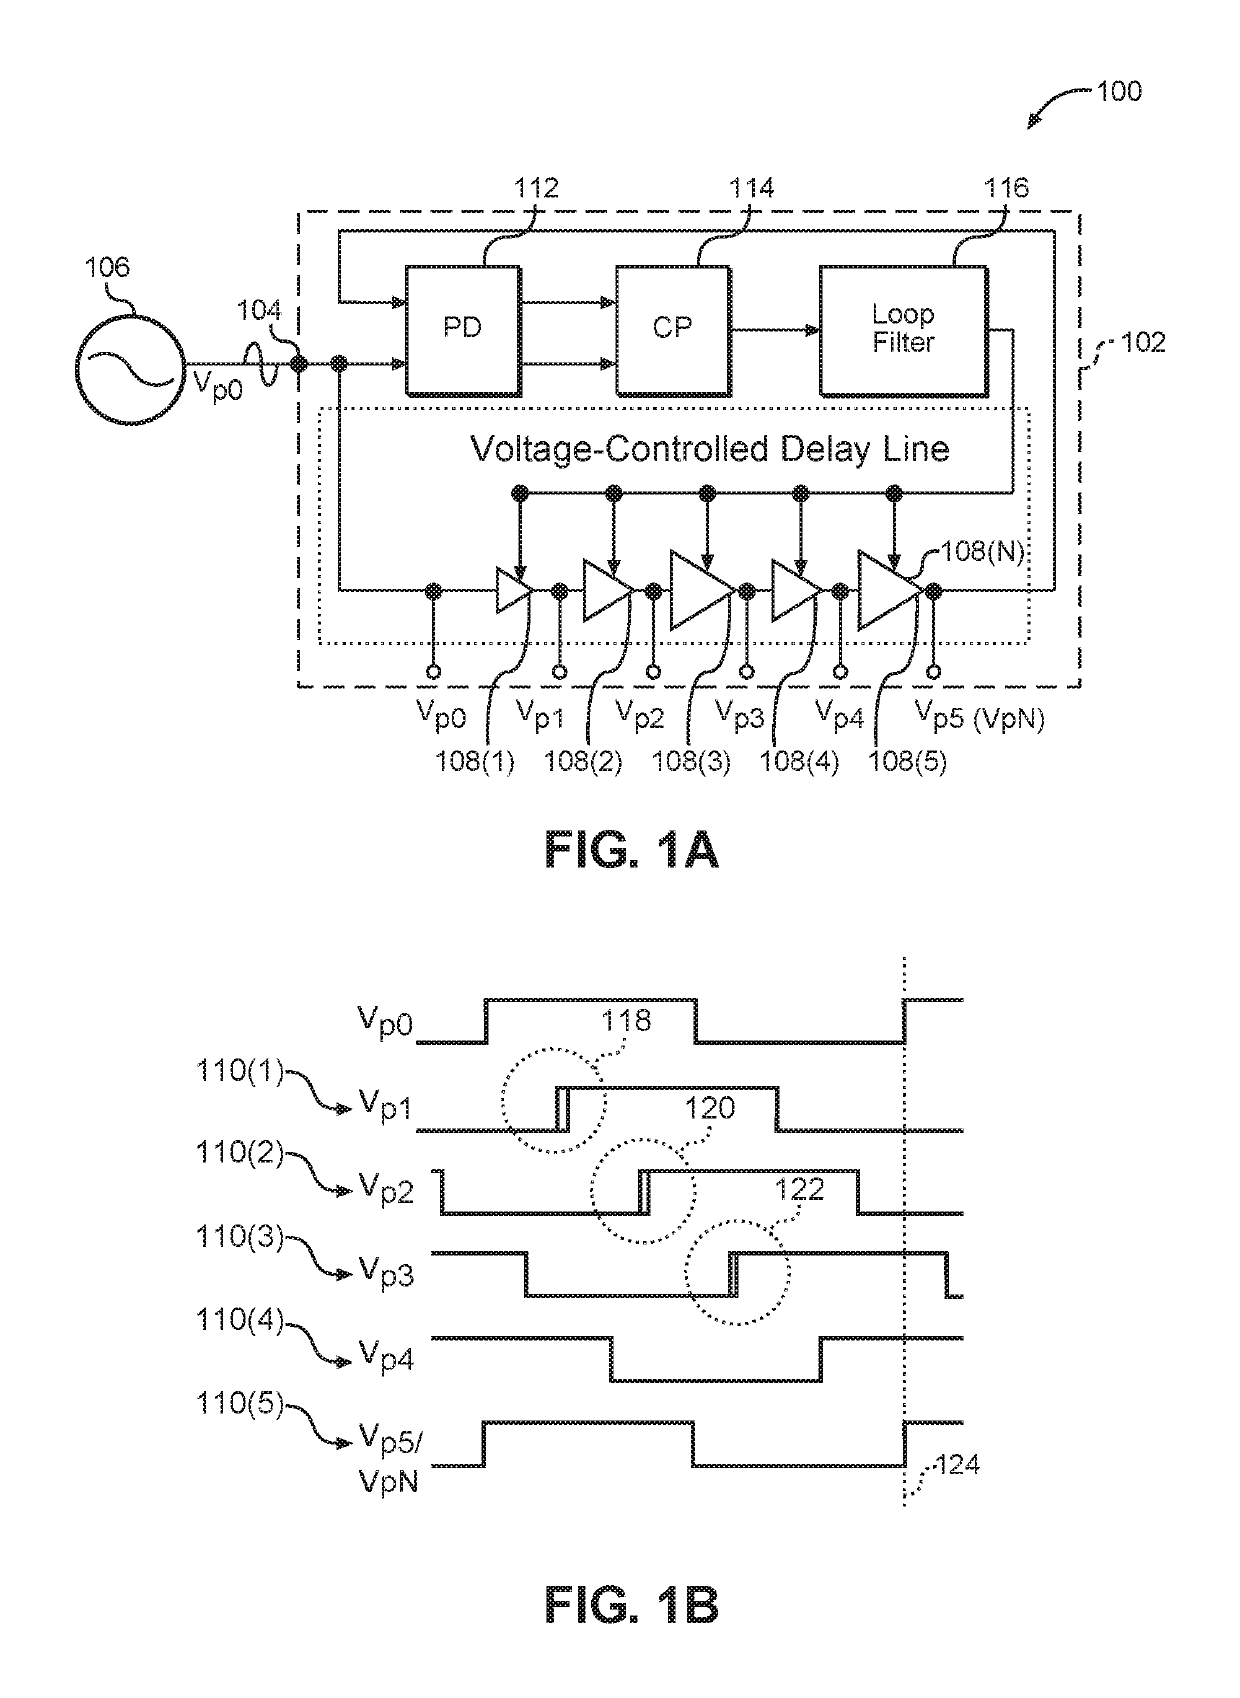 Multi-phase clock generation employing phase error detection in a controlled delay line